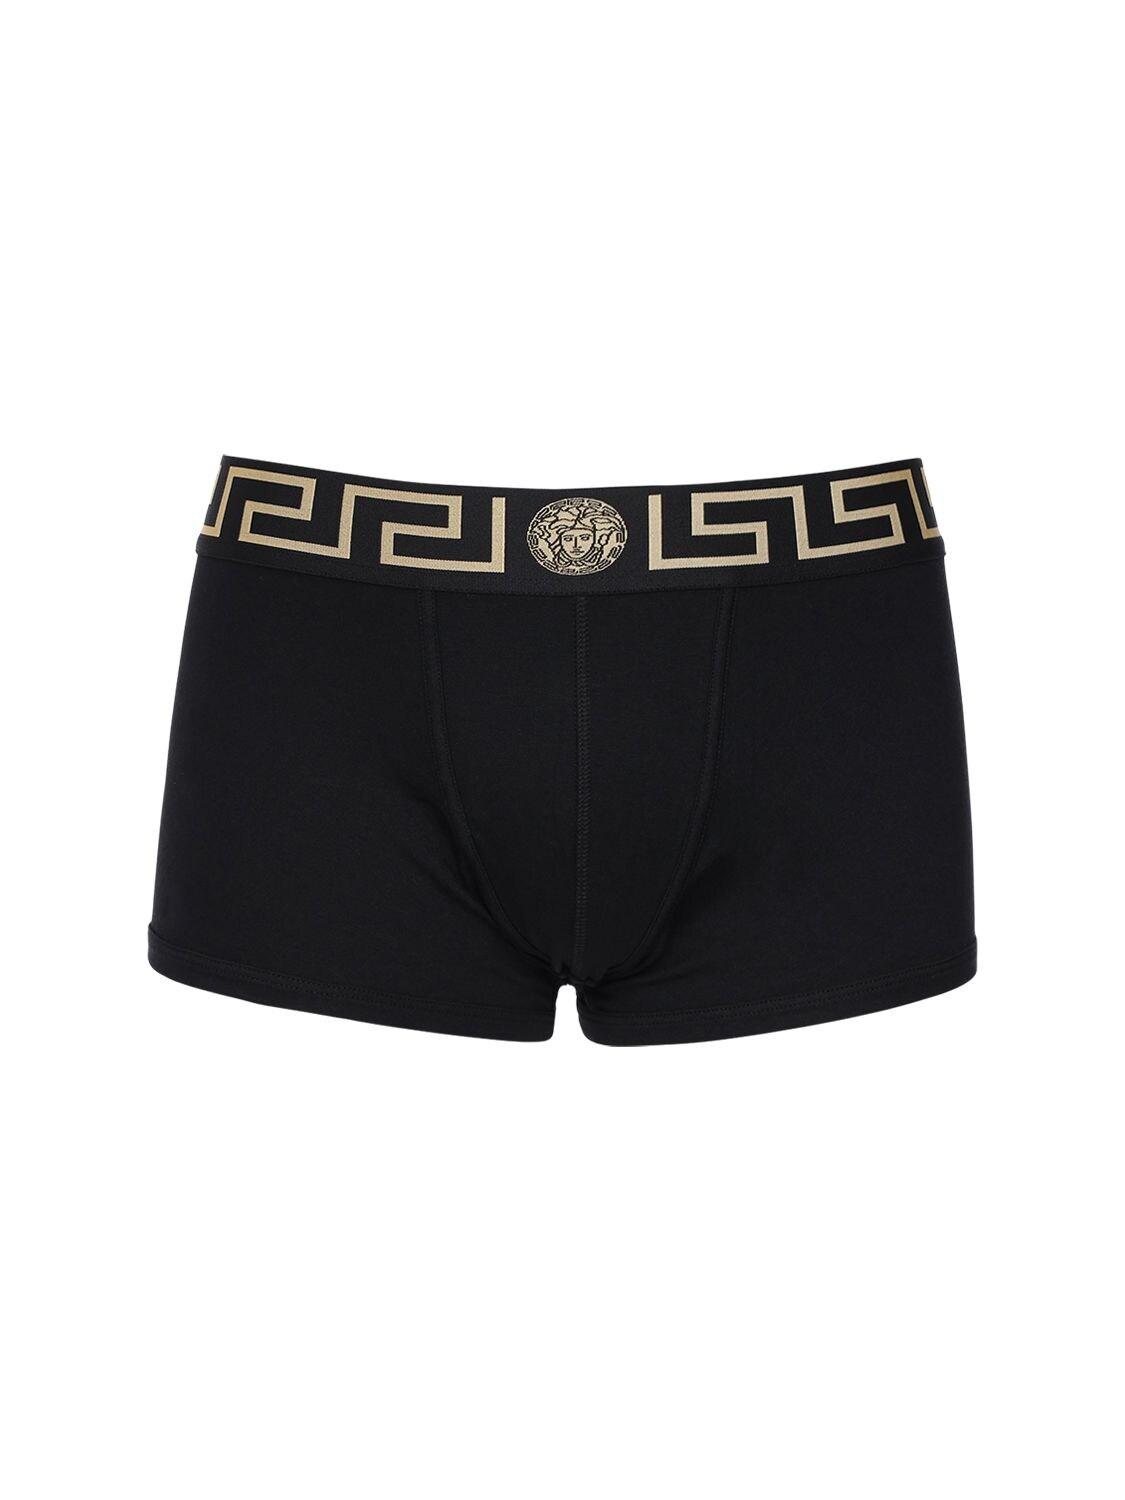 Versace Pack Of 3 Stretch Cotton Boxer Briefs in Black for Men - Lyst